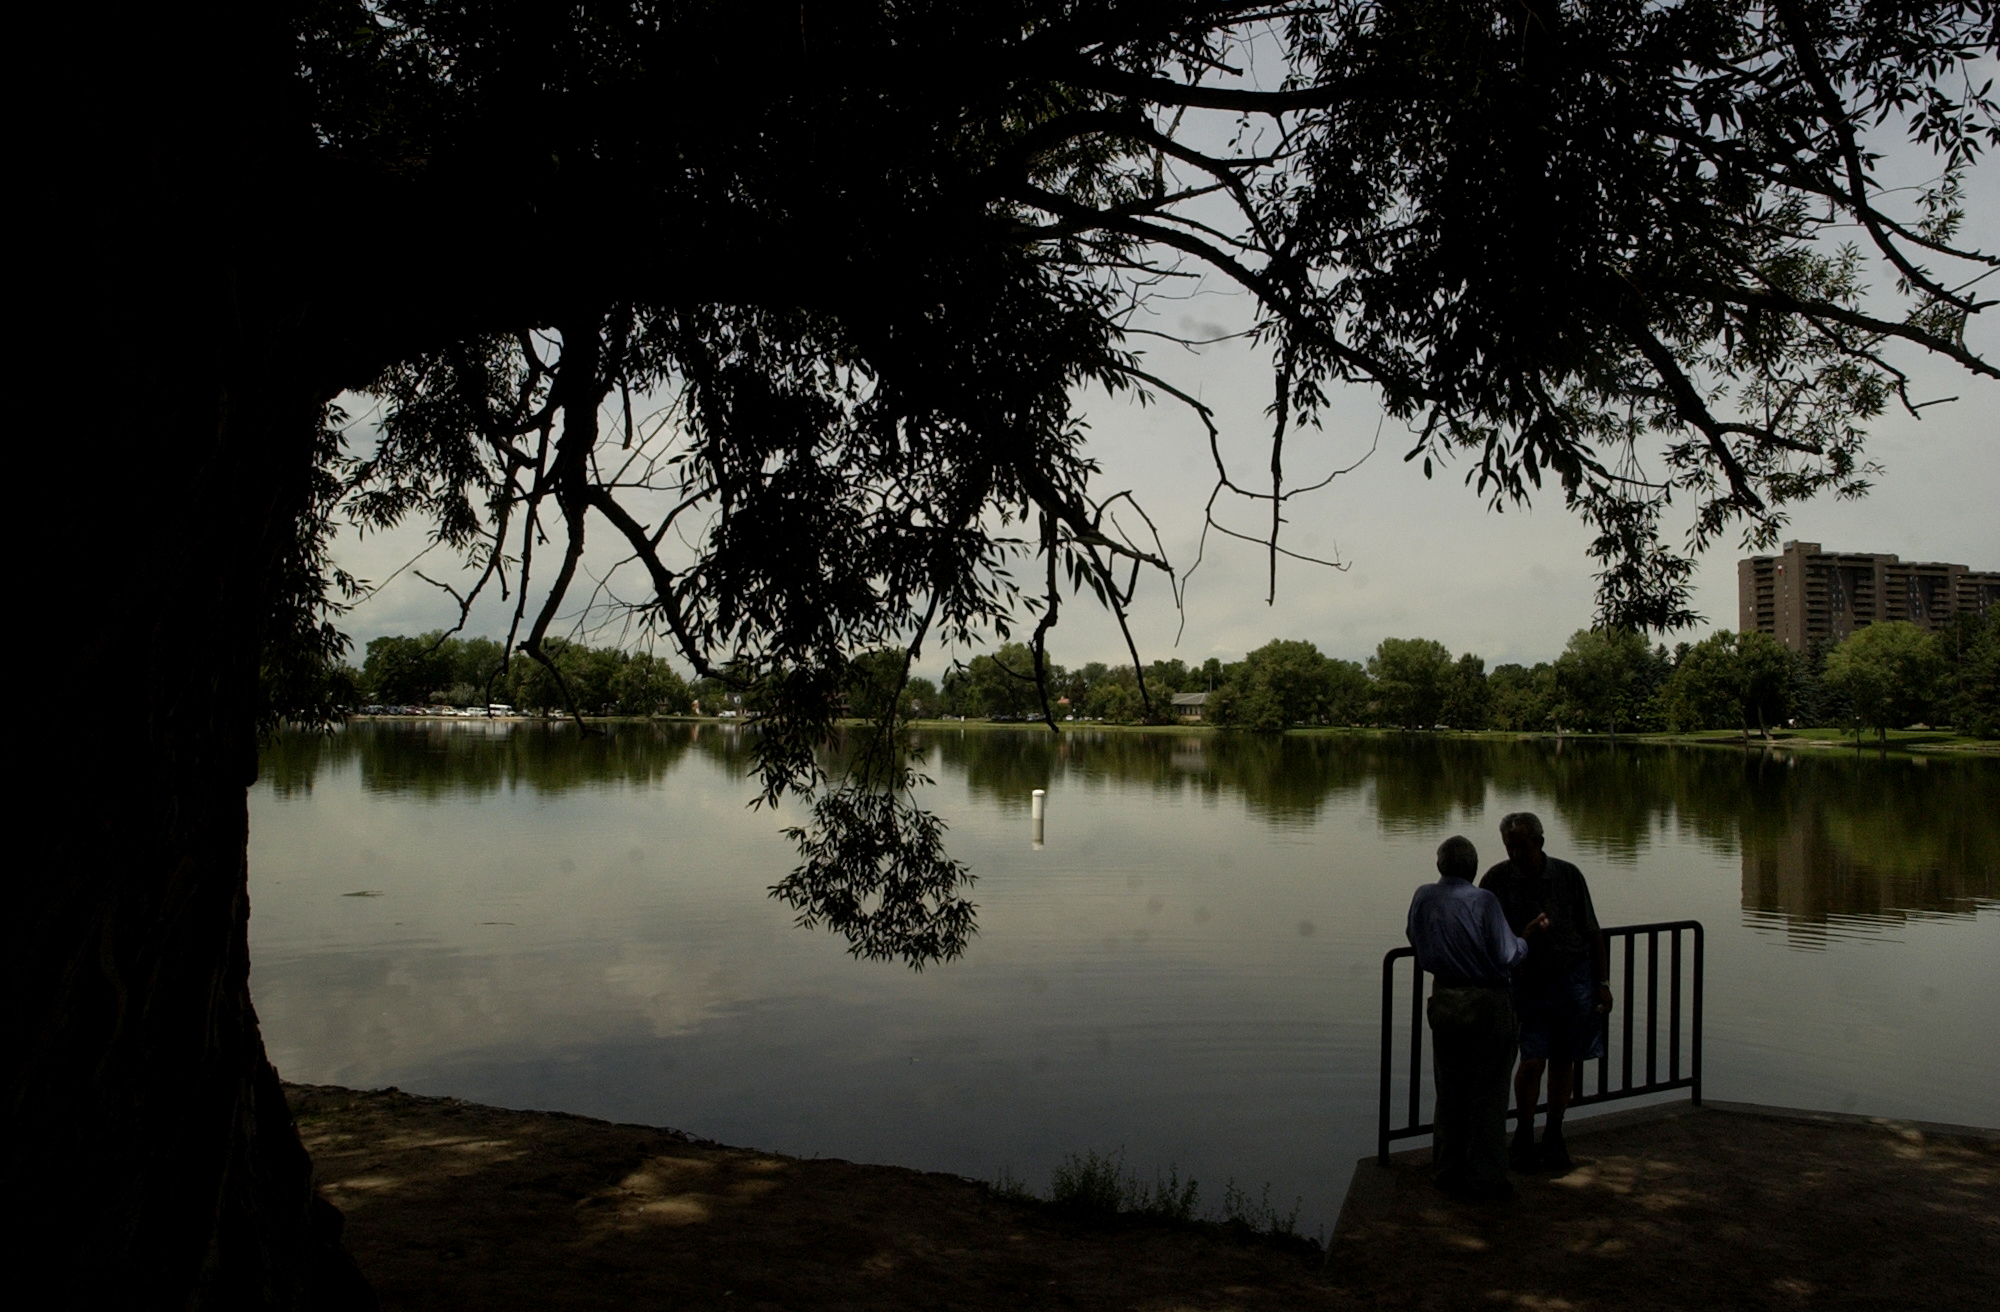 DENVER, CO, AUGUST 05, 2004 - (l-r) Garri Ovanesyan  and Isaak Komisarchik  enjoy conversation and the shade of a tree along Smith Lake at Washington Park in Denver, CO. (WATER******Our story talks about how the rain has impacted revenue for Denve